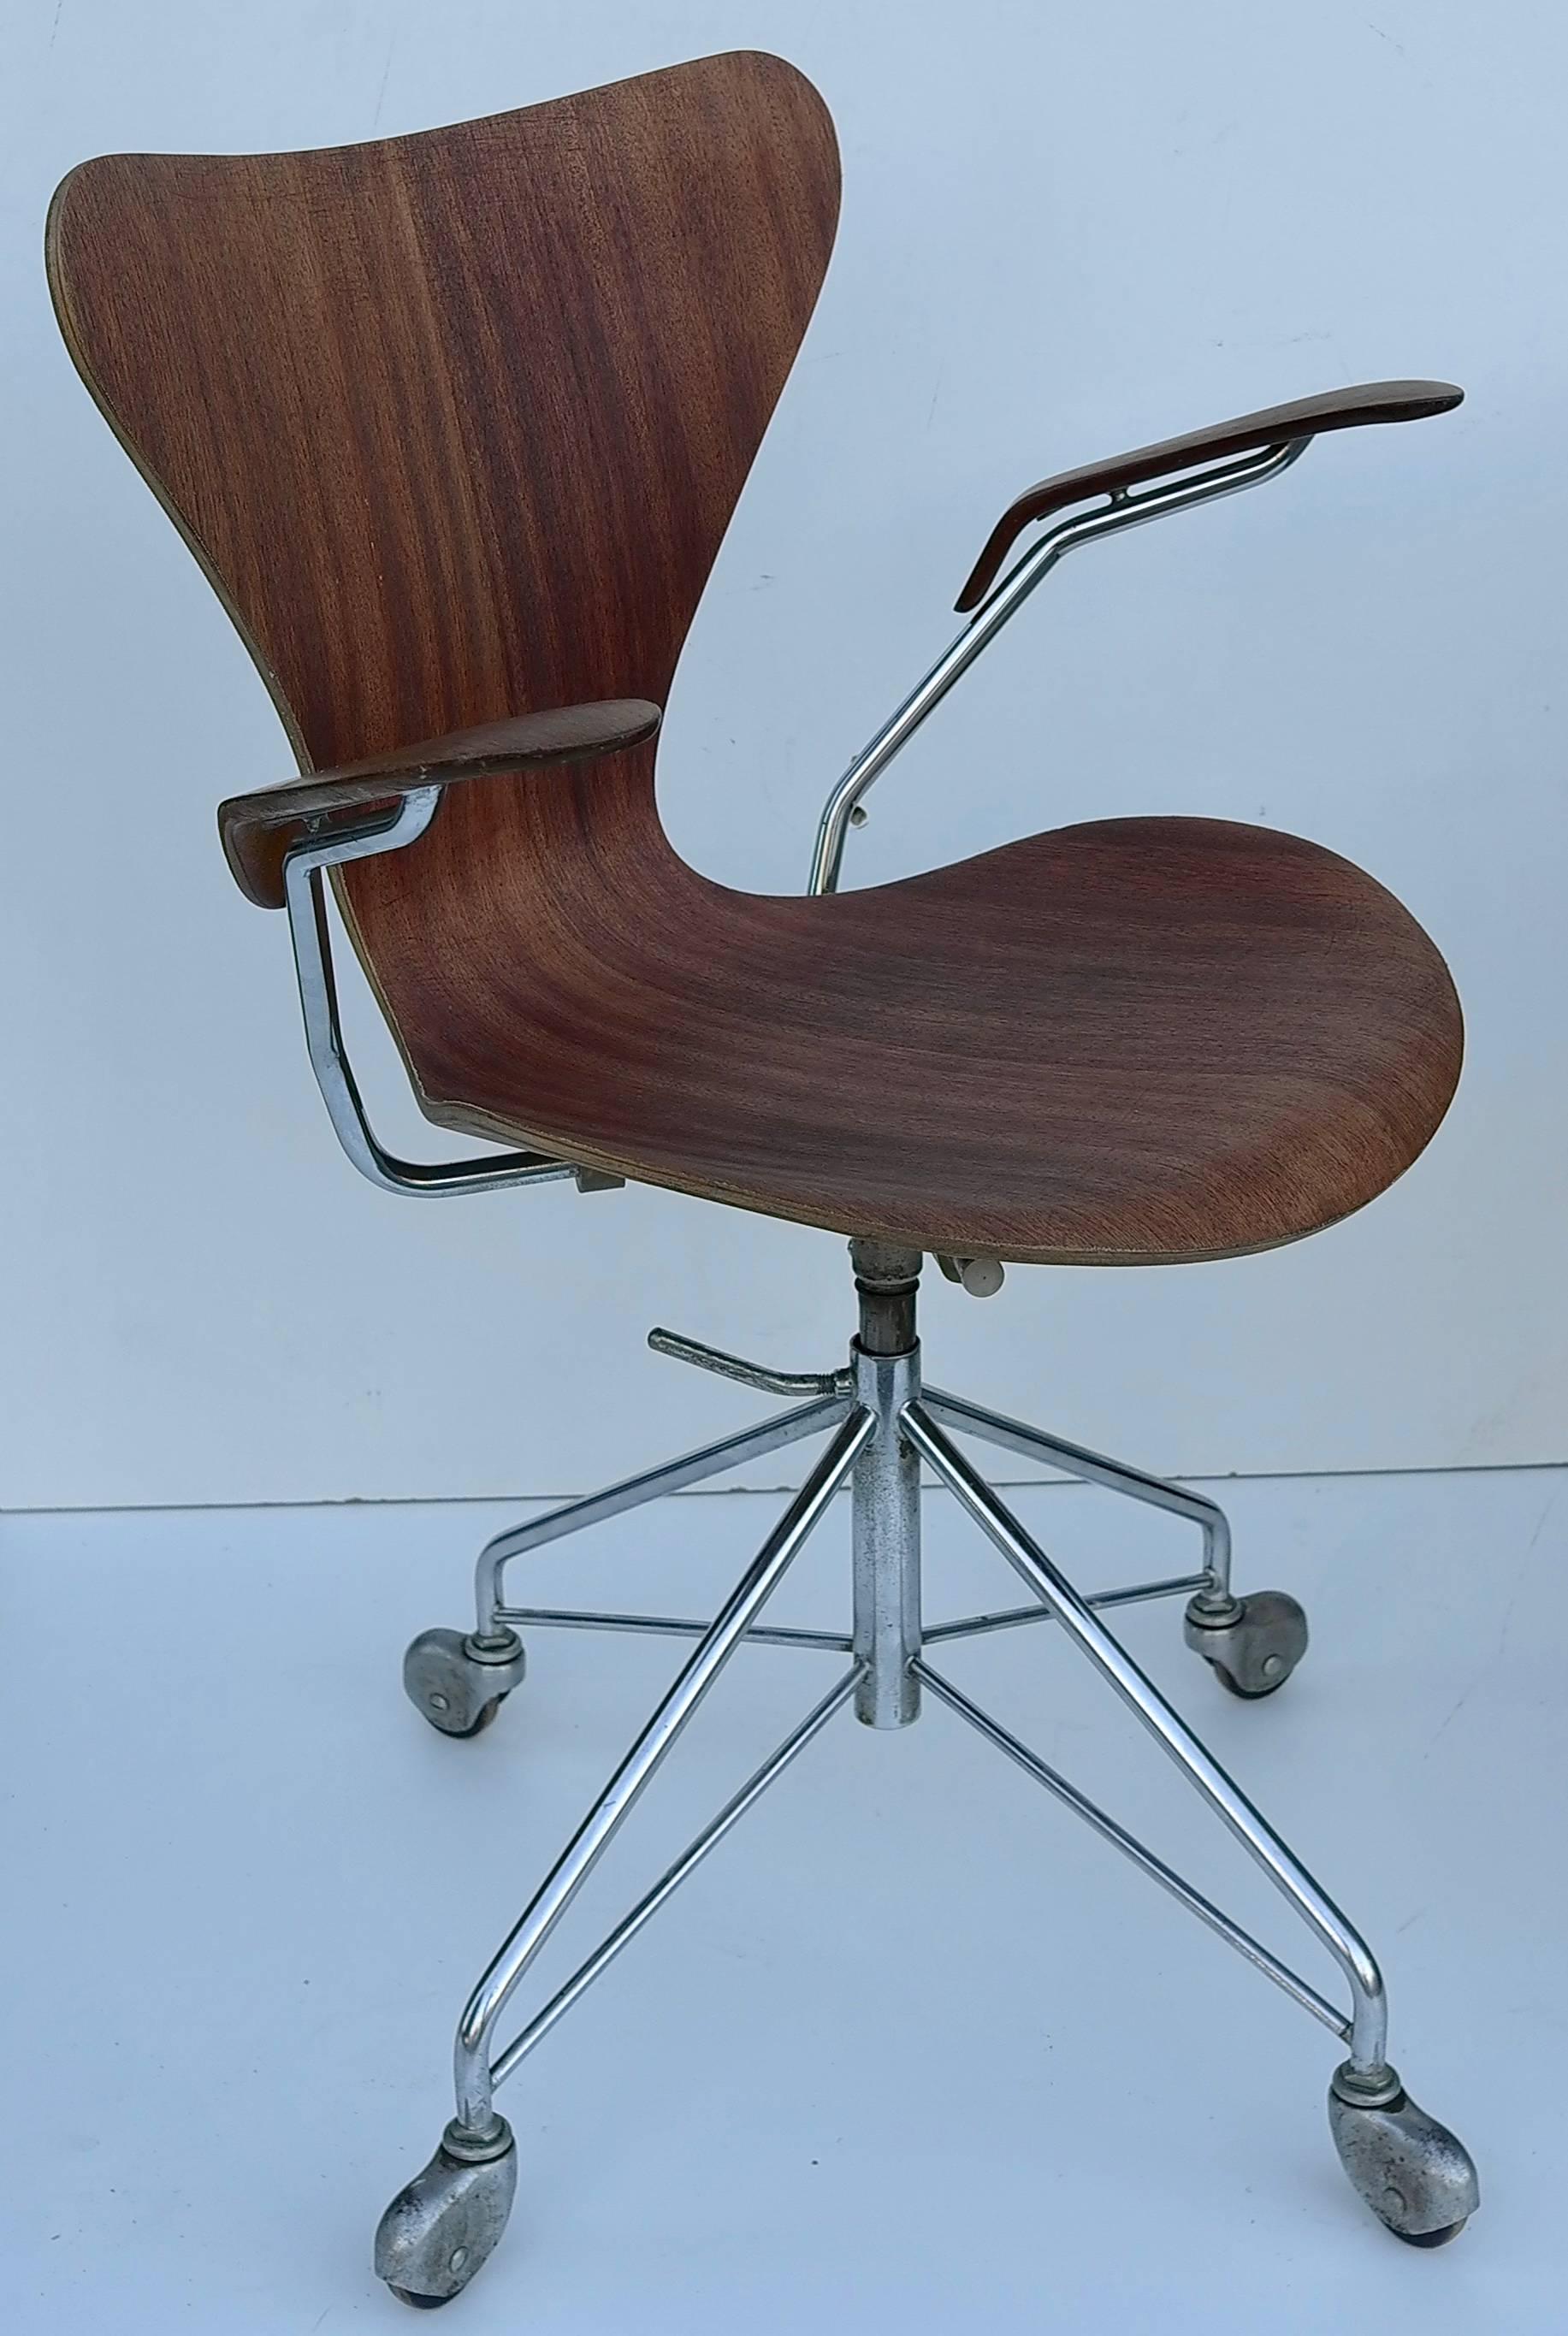 Office chair designed by Arne Jacobsen. Early production produced by Fritz Hansen in Denmark. Swivable and adjustable in height.